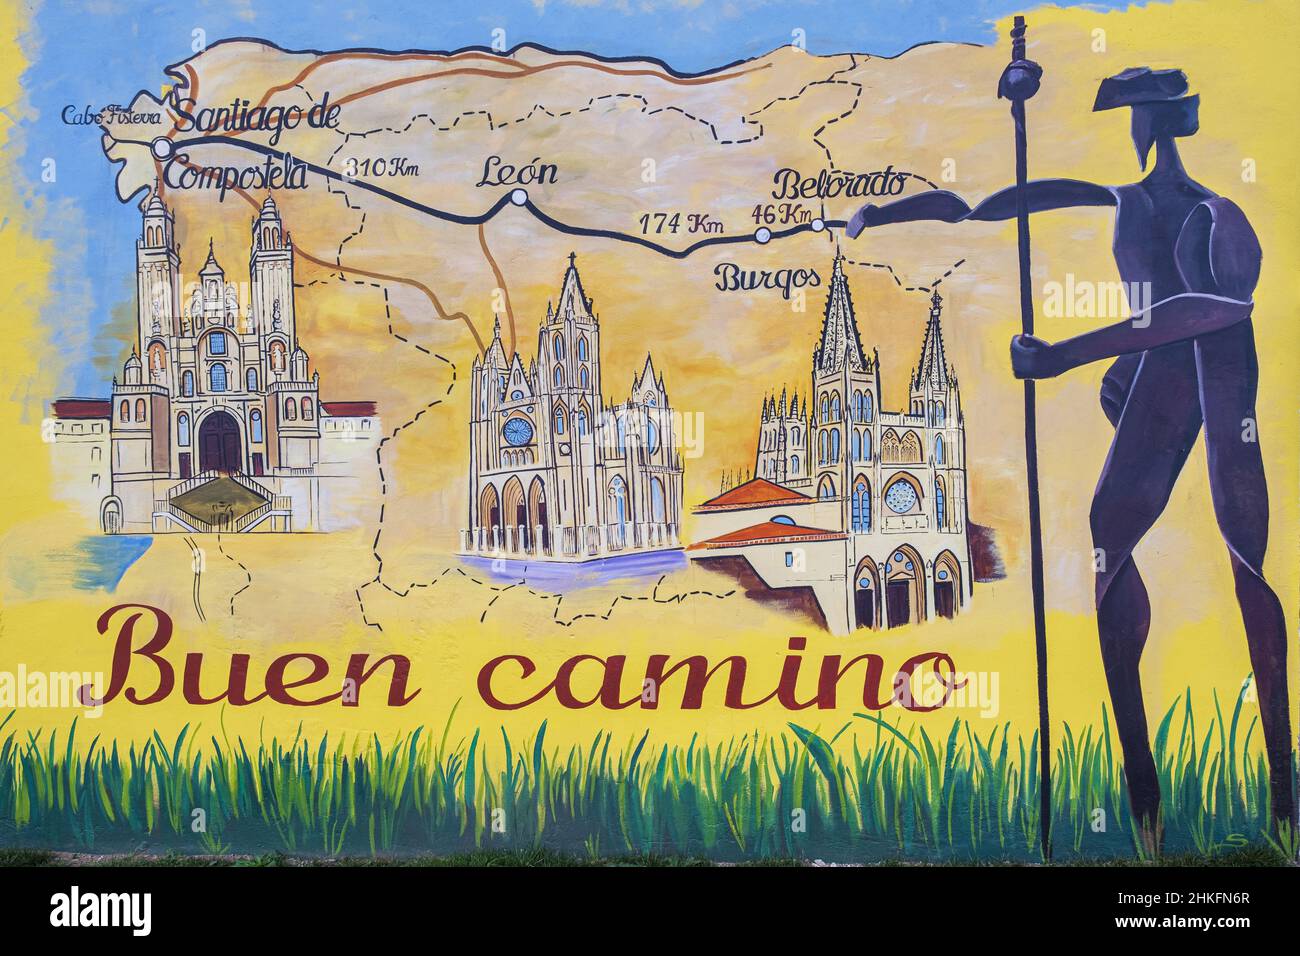 Spain, Castile and León, Belorado, stage on the Camino Francés, Spanish route of the pilgrimage to Santiago de Compostela, listed as a UNESCO World Heritage Site, mural Stock Photo